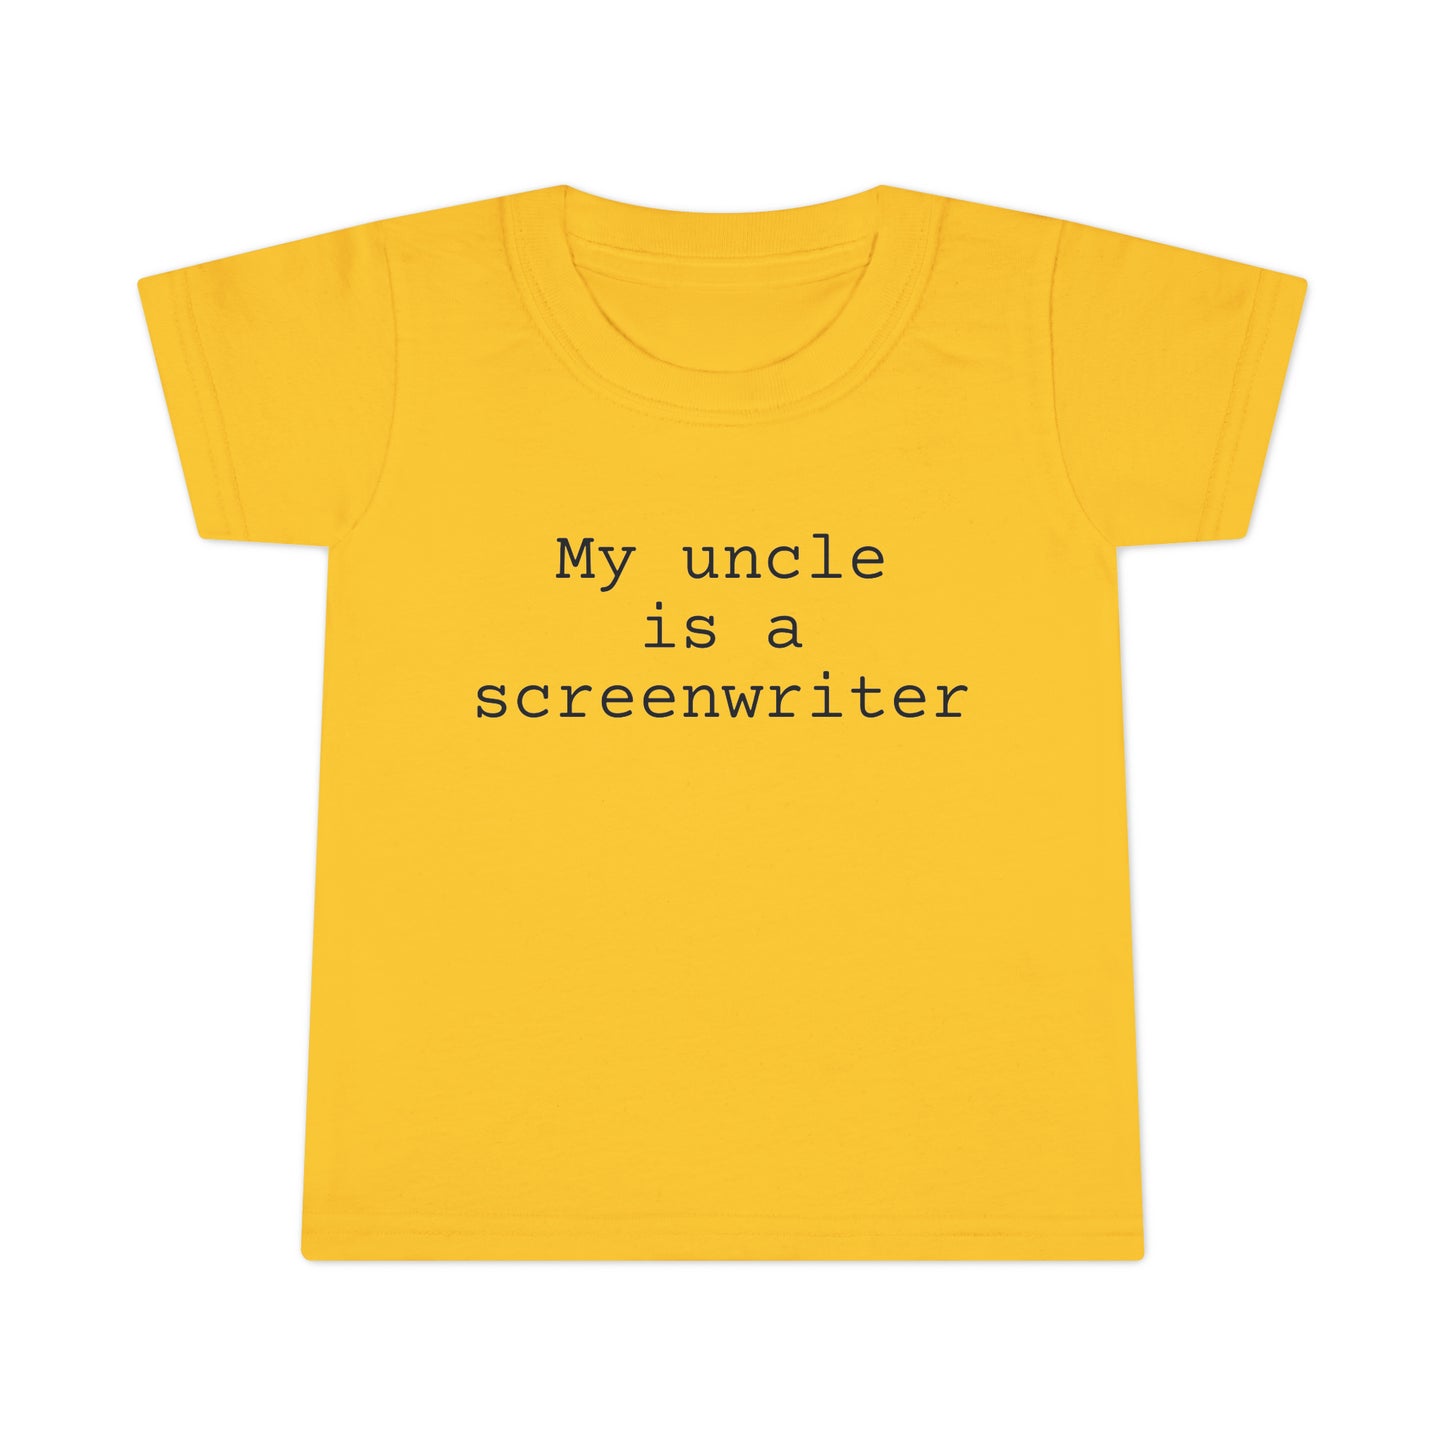 My Uncle is a Screenwriter Toddler T-shirt